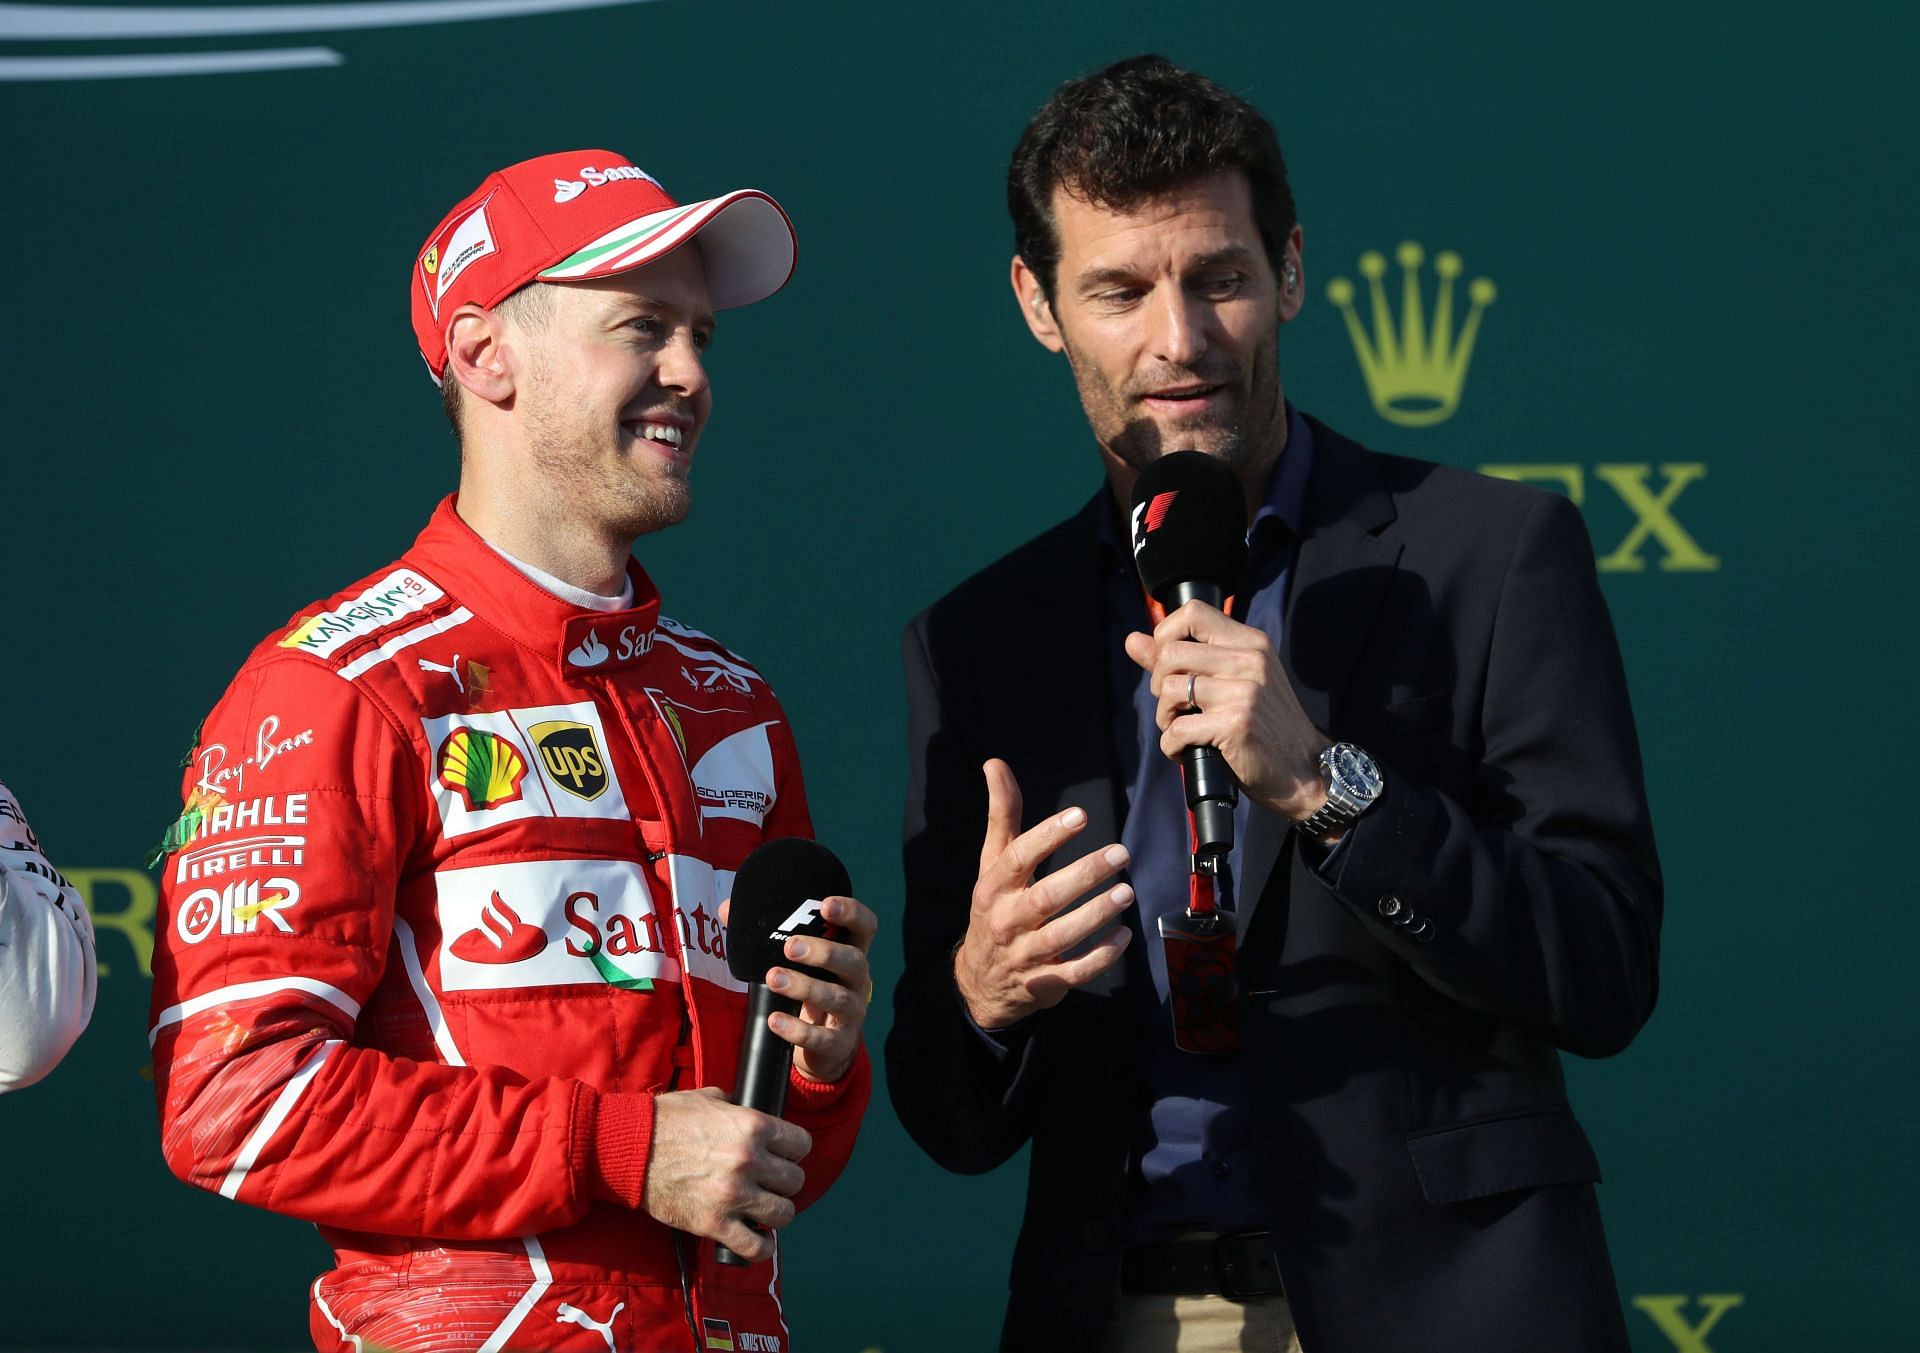 Sebastian Vettel (left) and Mark Webber (right) on the podium during the Australian Formula One Grand Prix at Albert Park on March 26, 2017, in Melbourne, Australia. (Photo by Robert Cianflone/Getty Images)